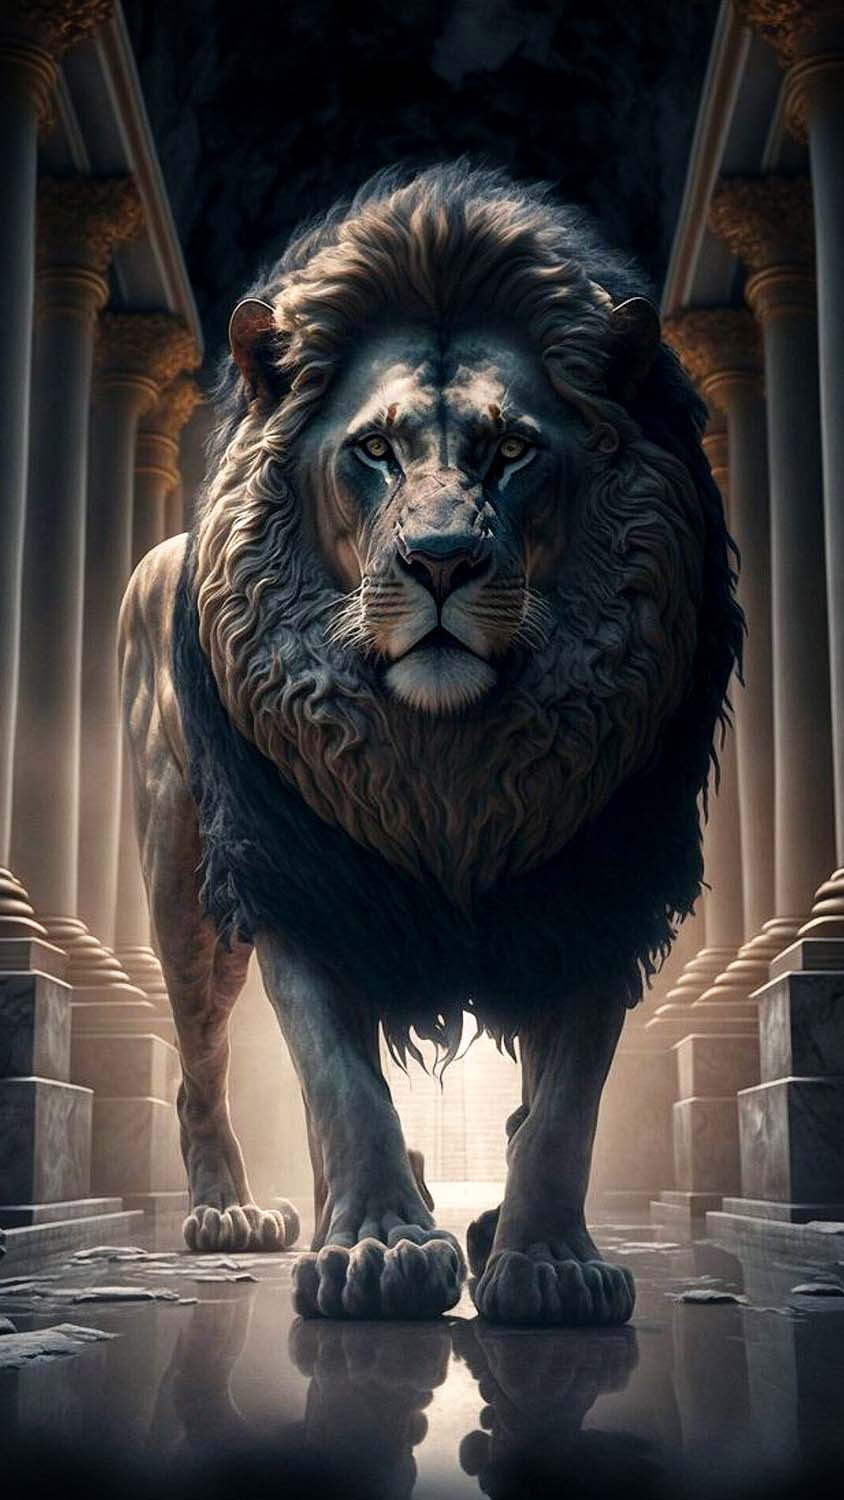 The King Lion